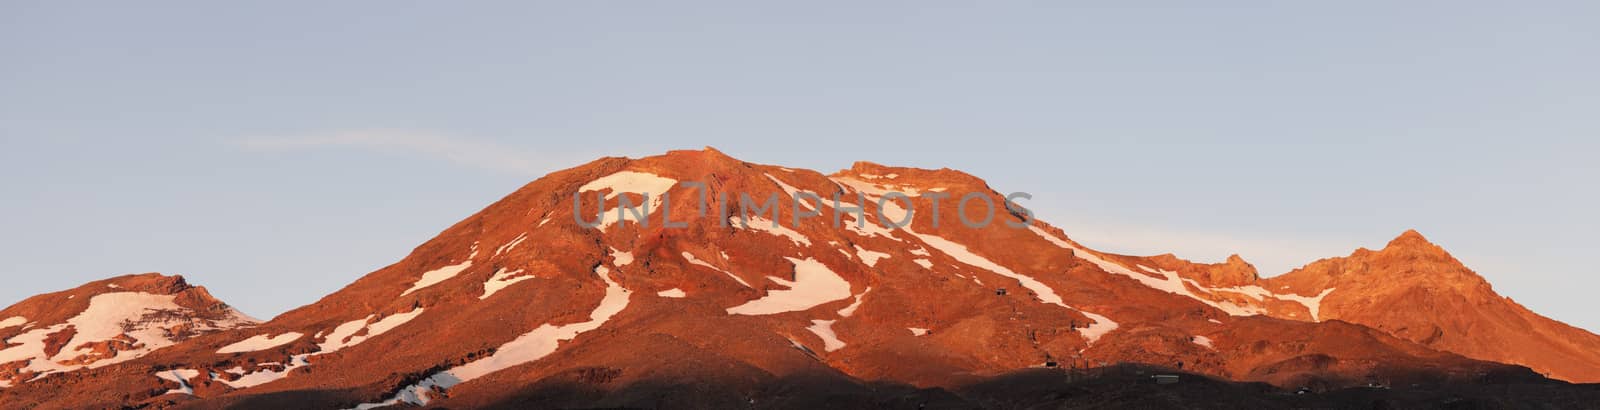 Red mountains in Tongarino National Park - New Zealand